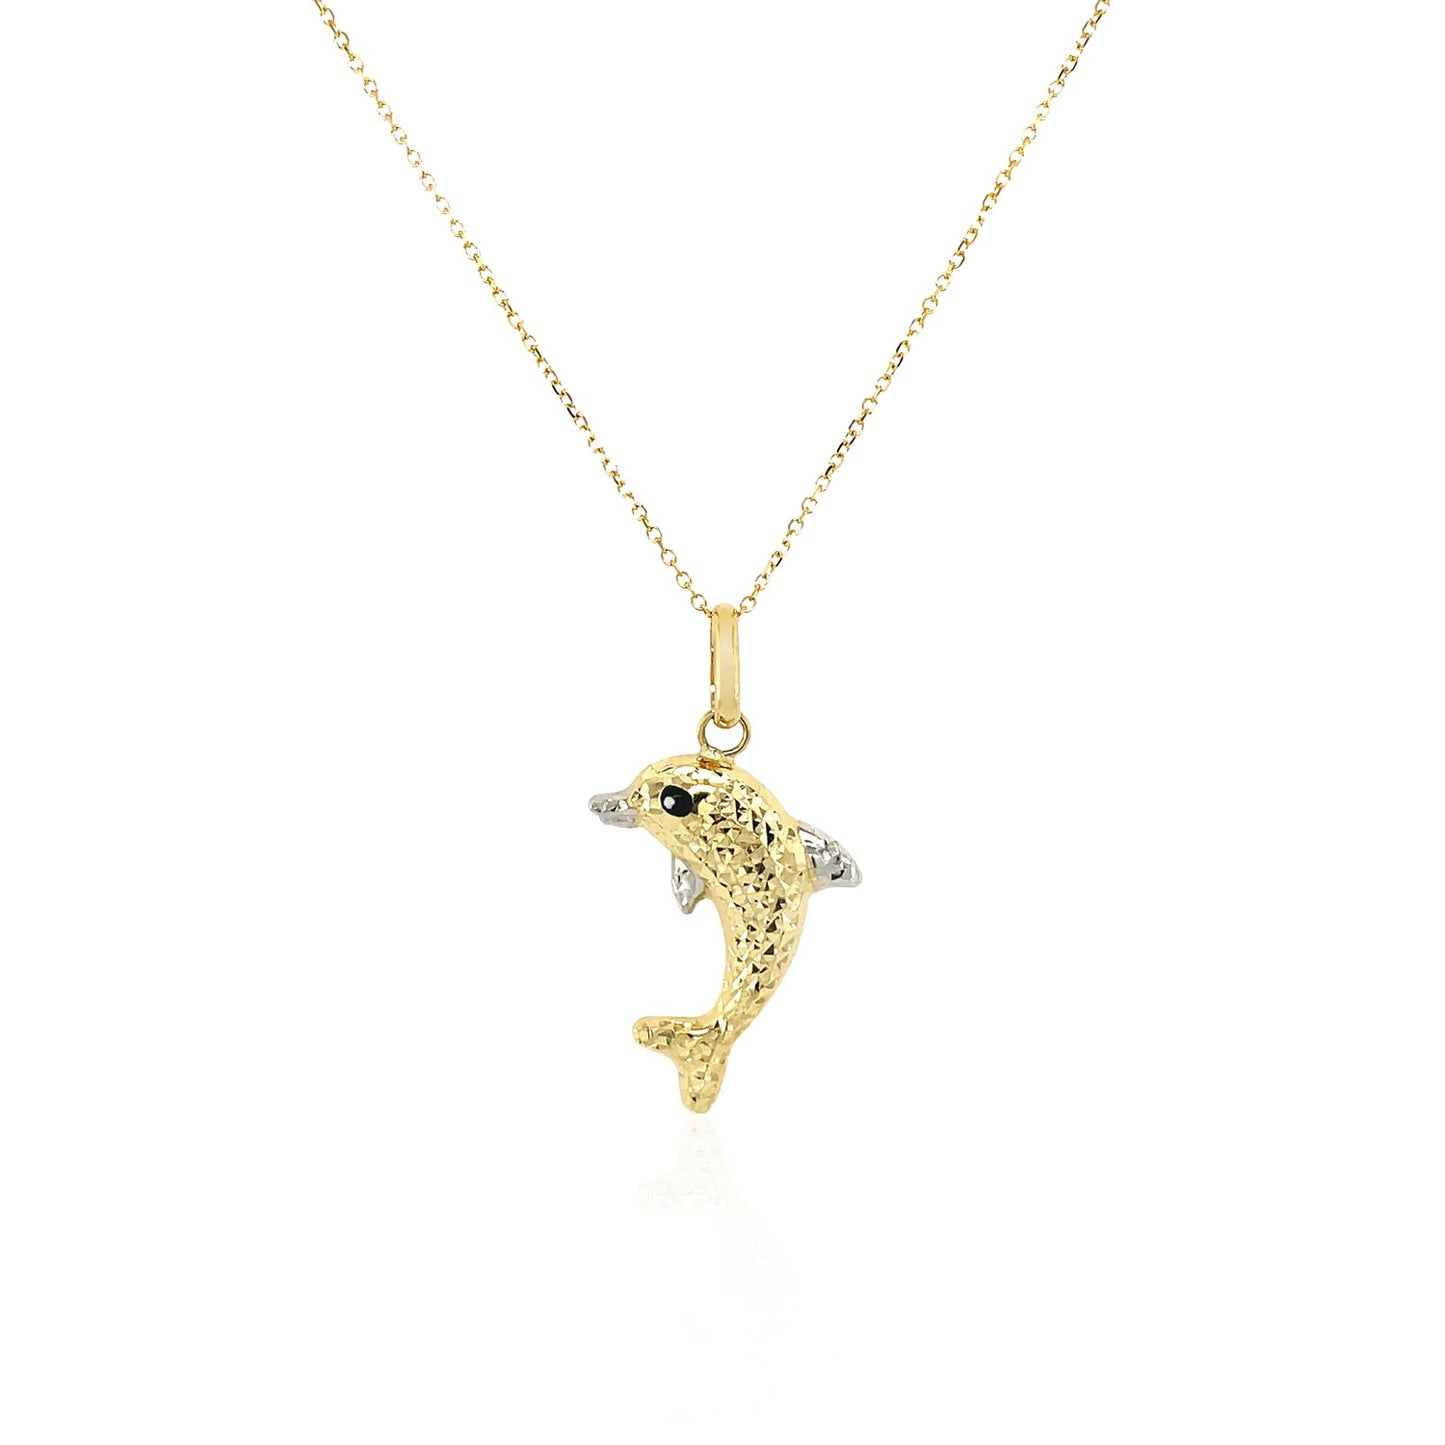 14k Two-Toned Yellow and White Gold Reversible Dolphin Pendant